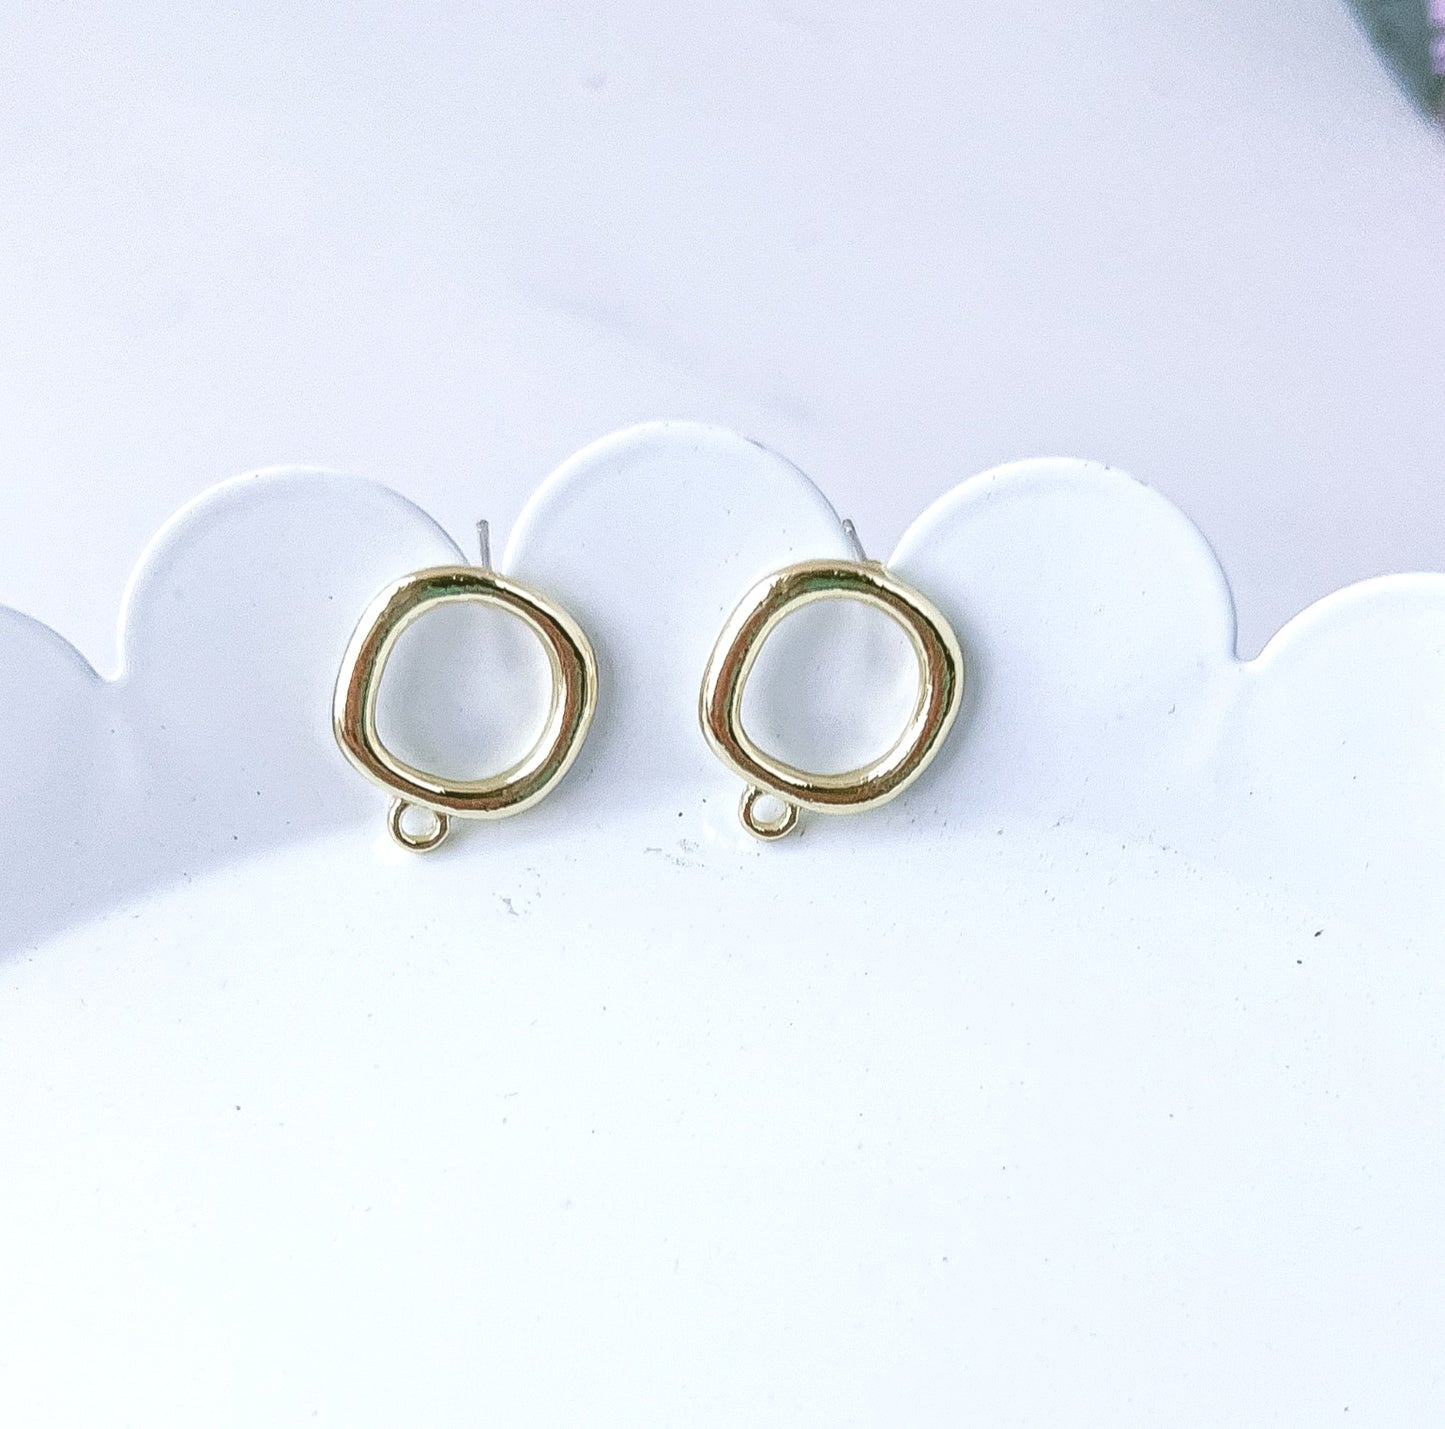 Rounded Square Frame Stud Finding - 10 PIECES